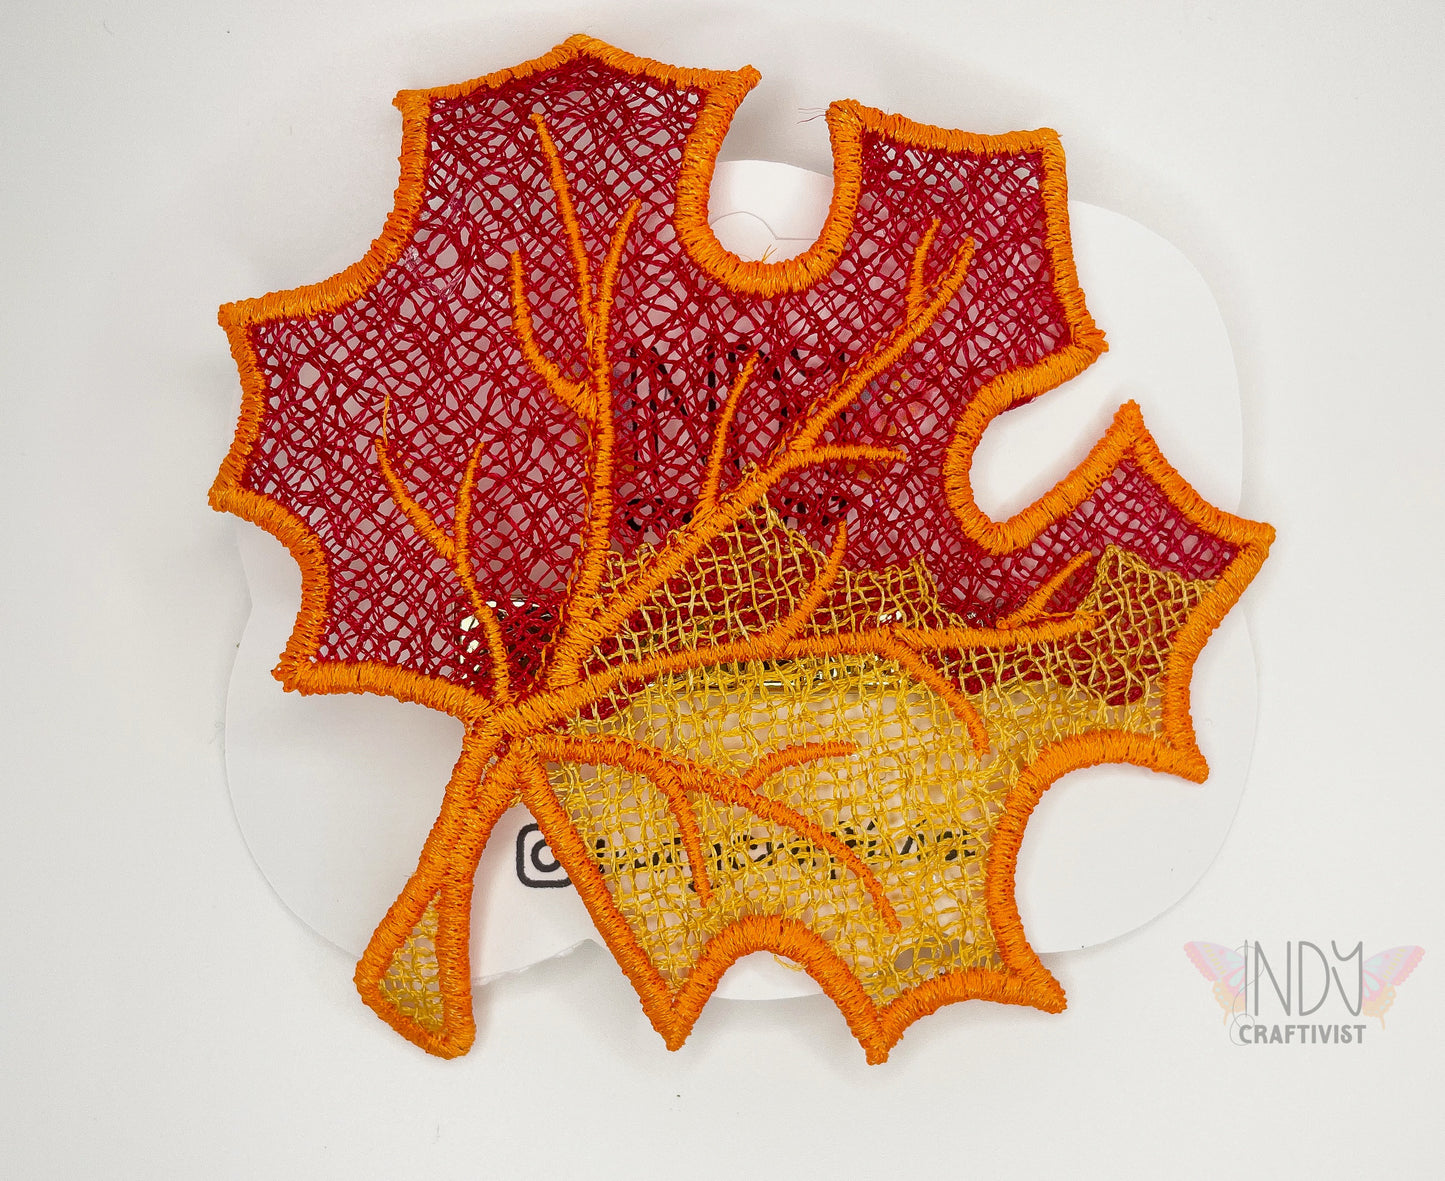 Maple Leaf Embroidered Hair Jewelry